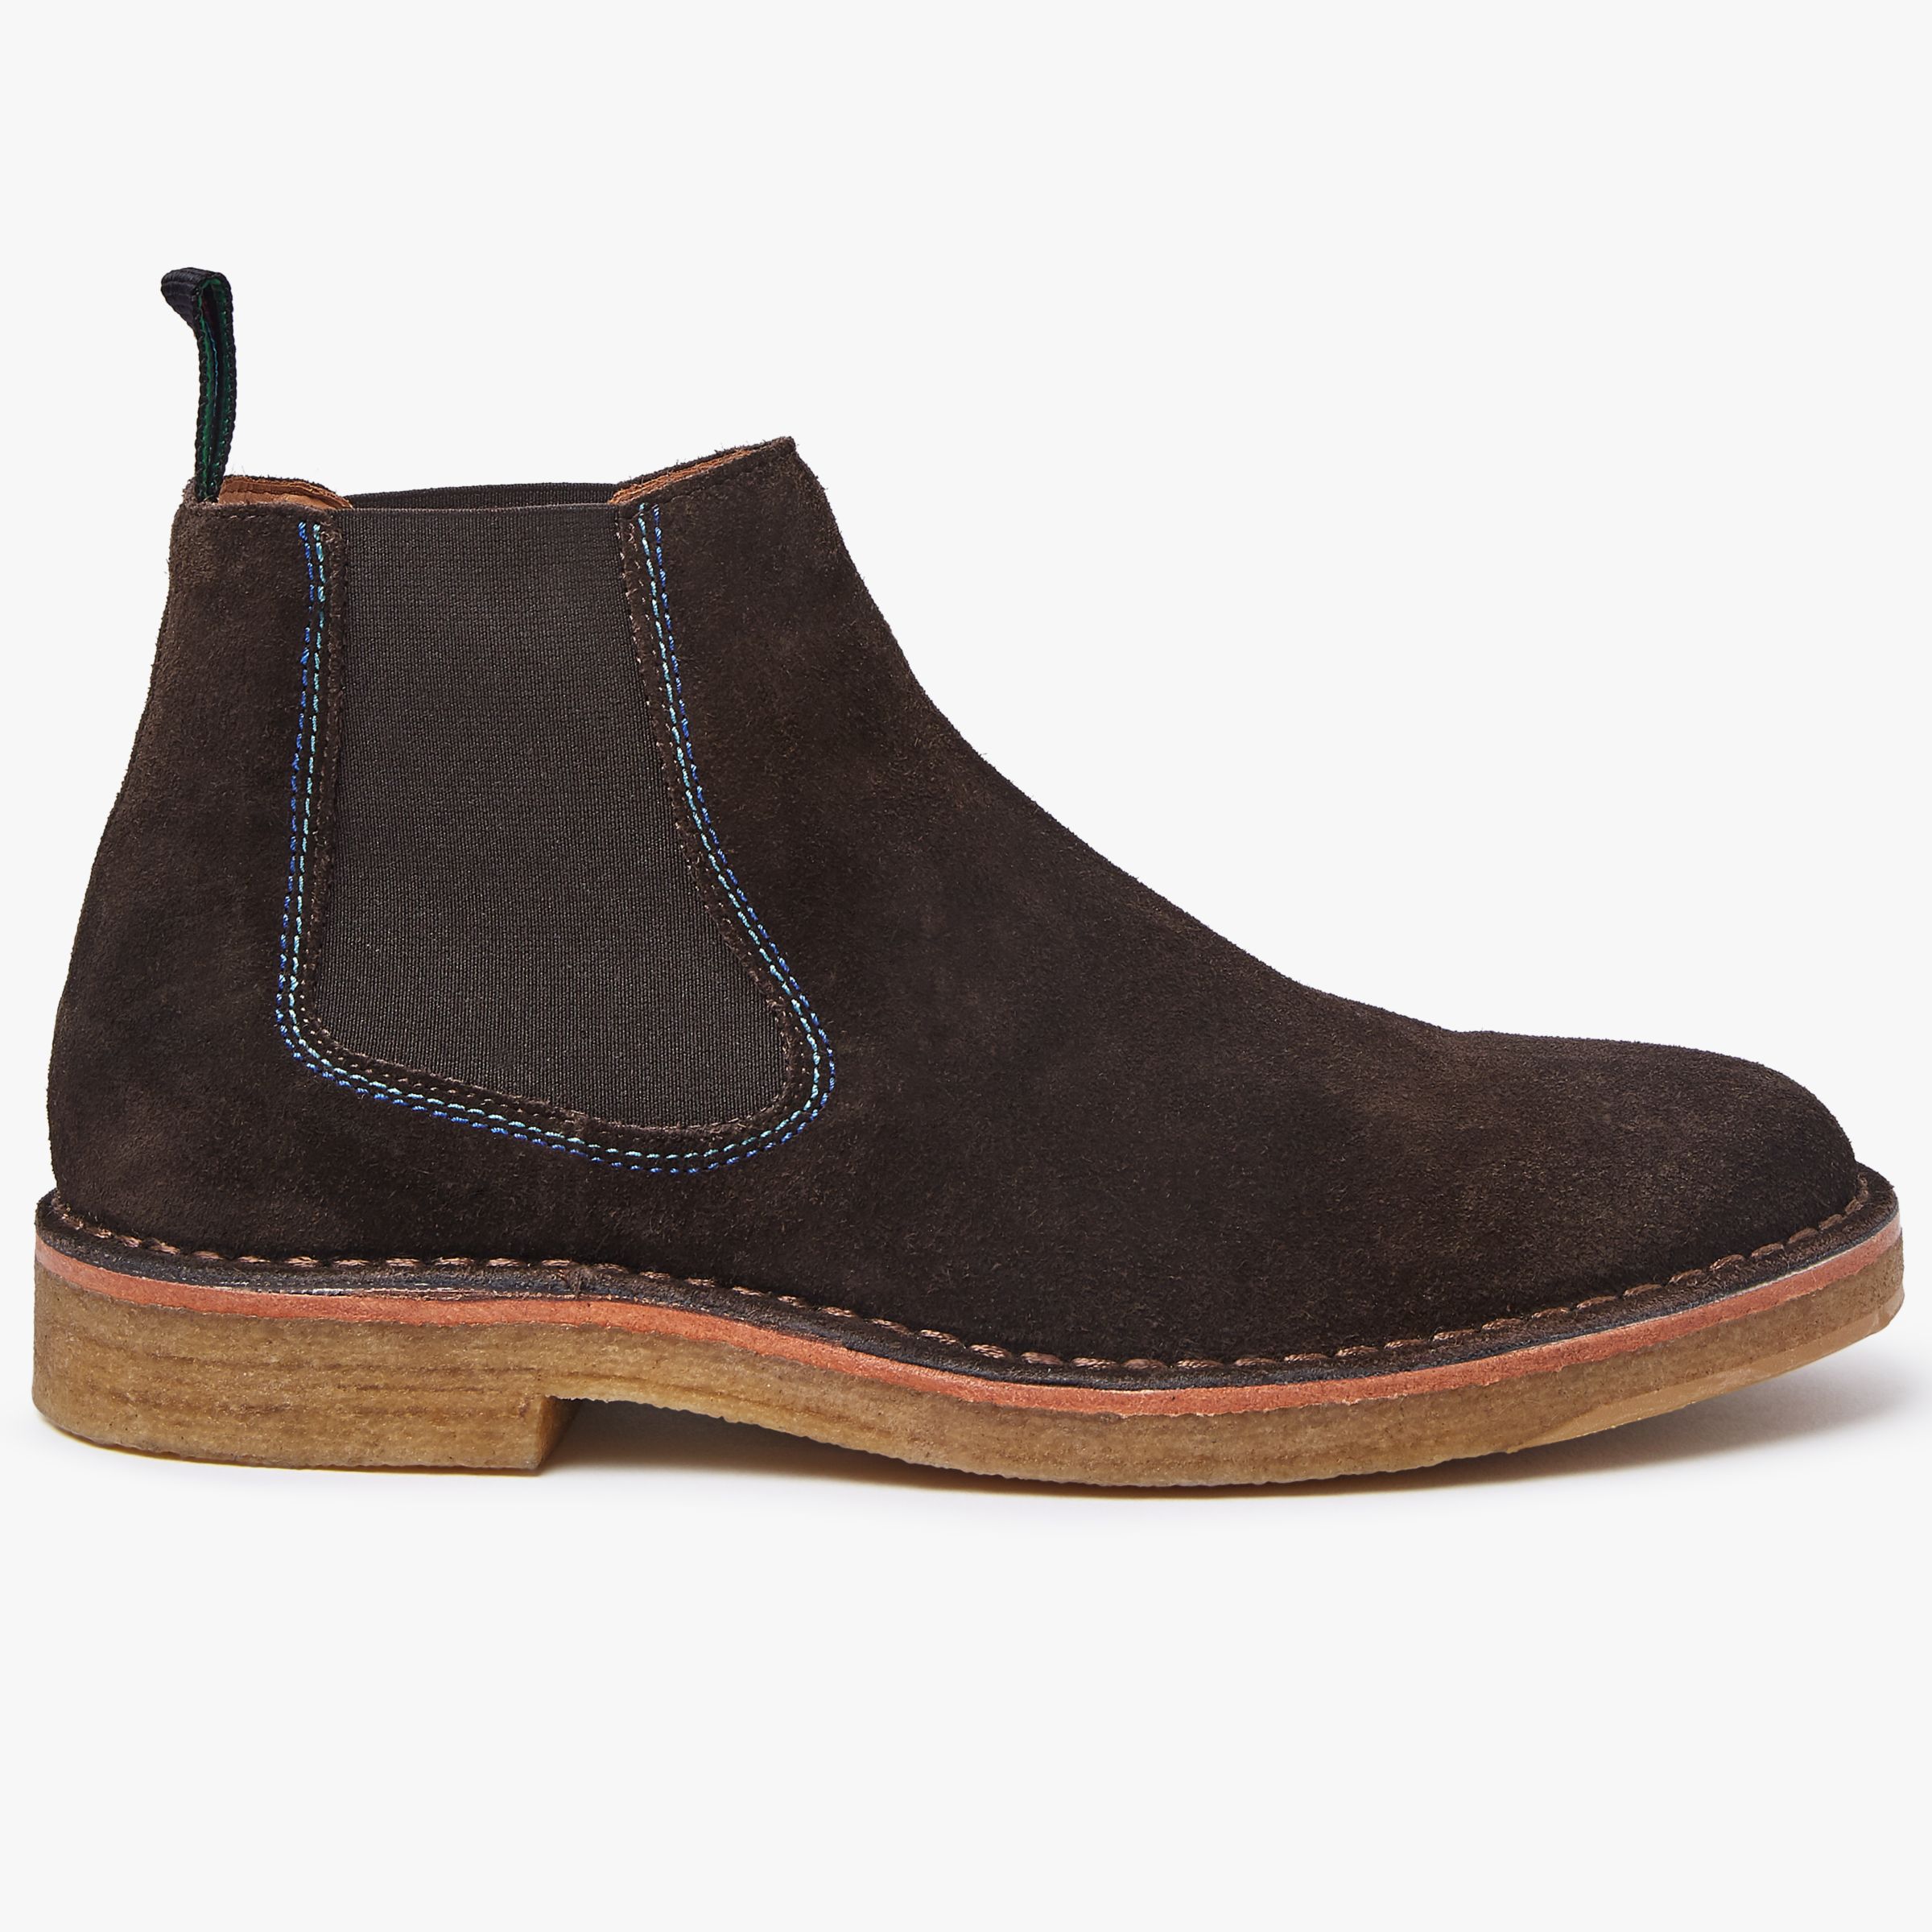 Paul Smith Dart Chelsea Boots, Brown